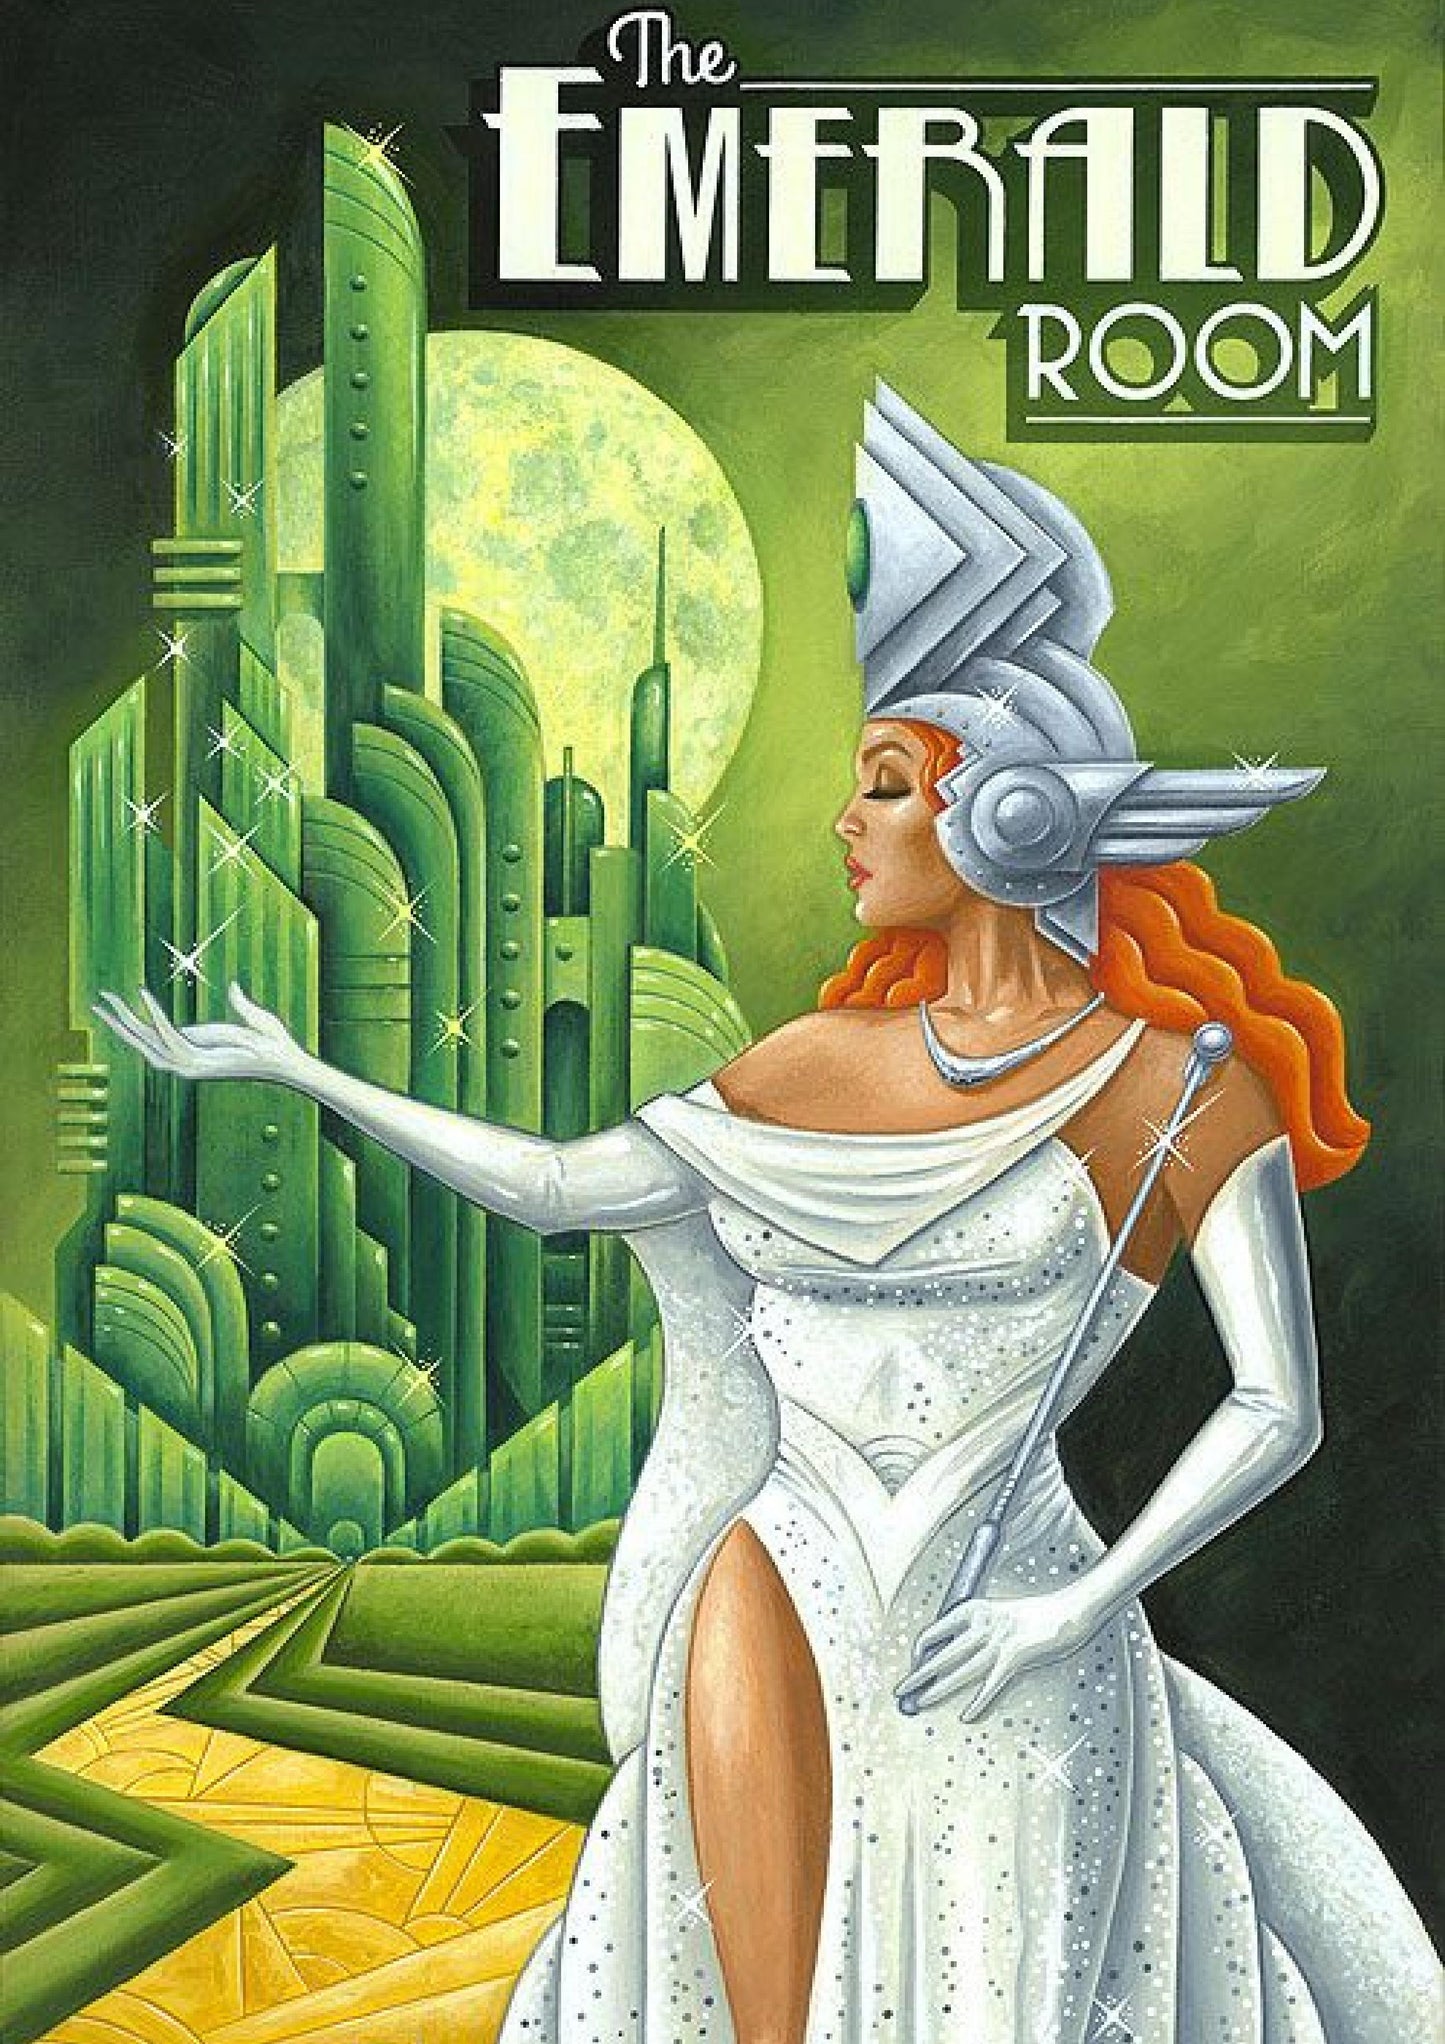 The Emerald Room - Poster